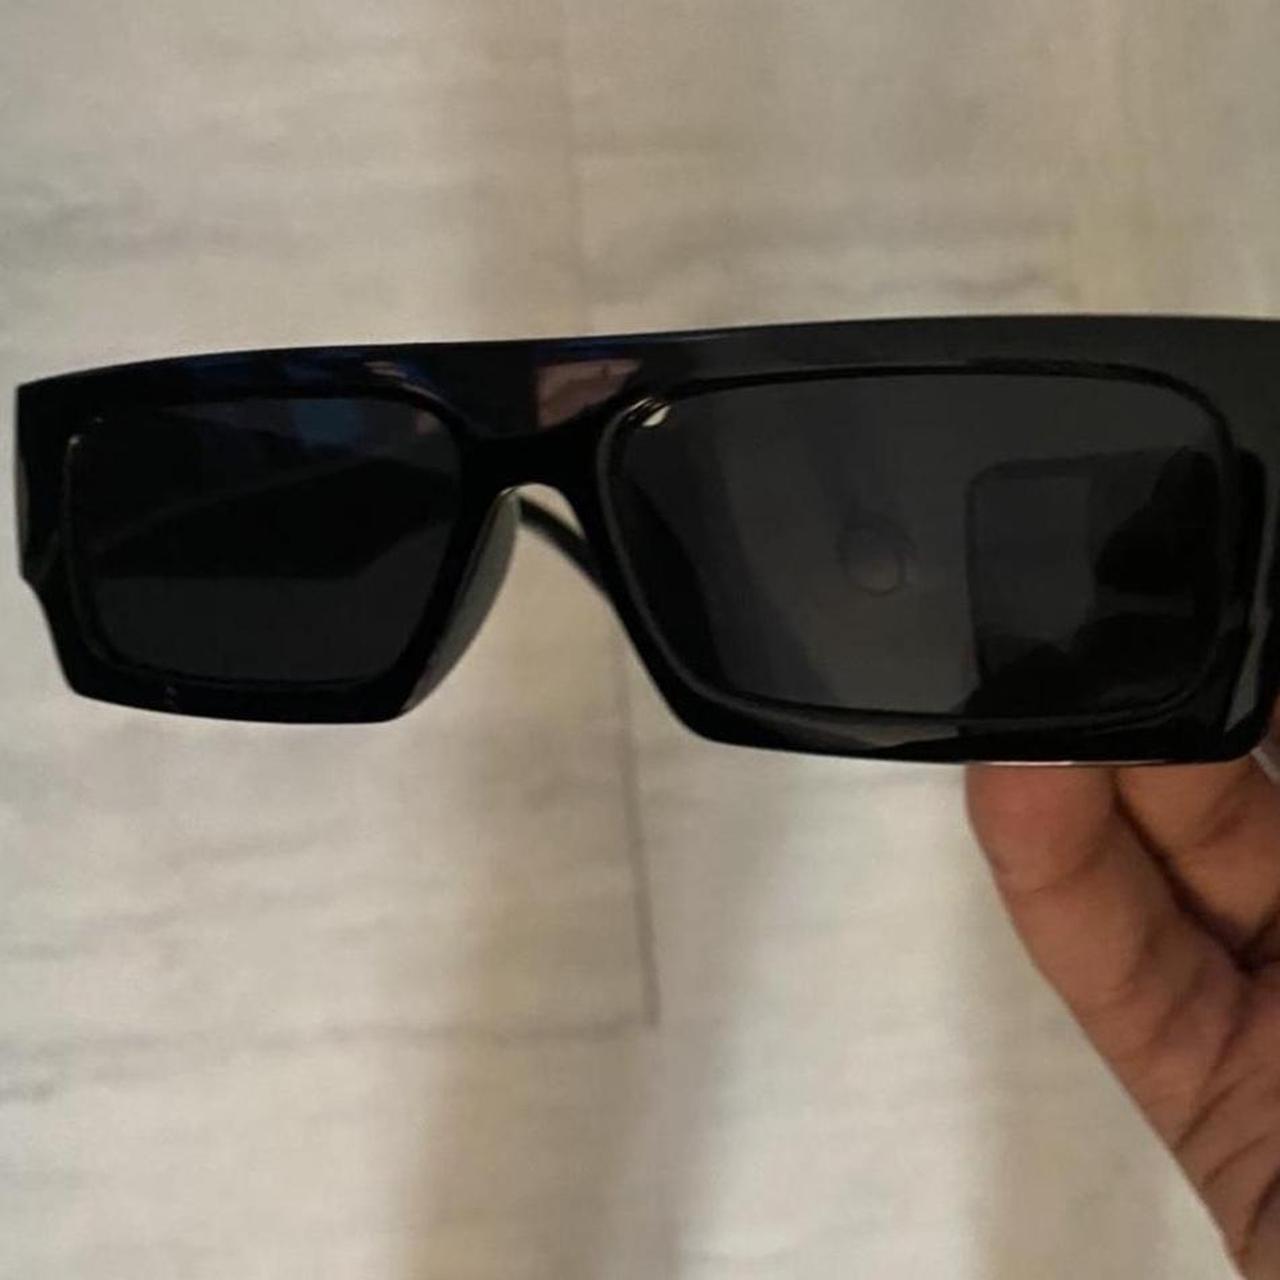 Flaw shown in picture for sale off white glasses - Depop